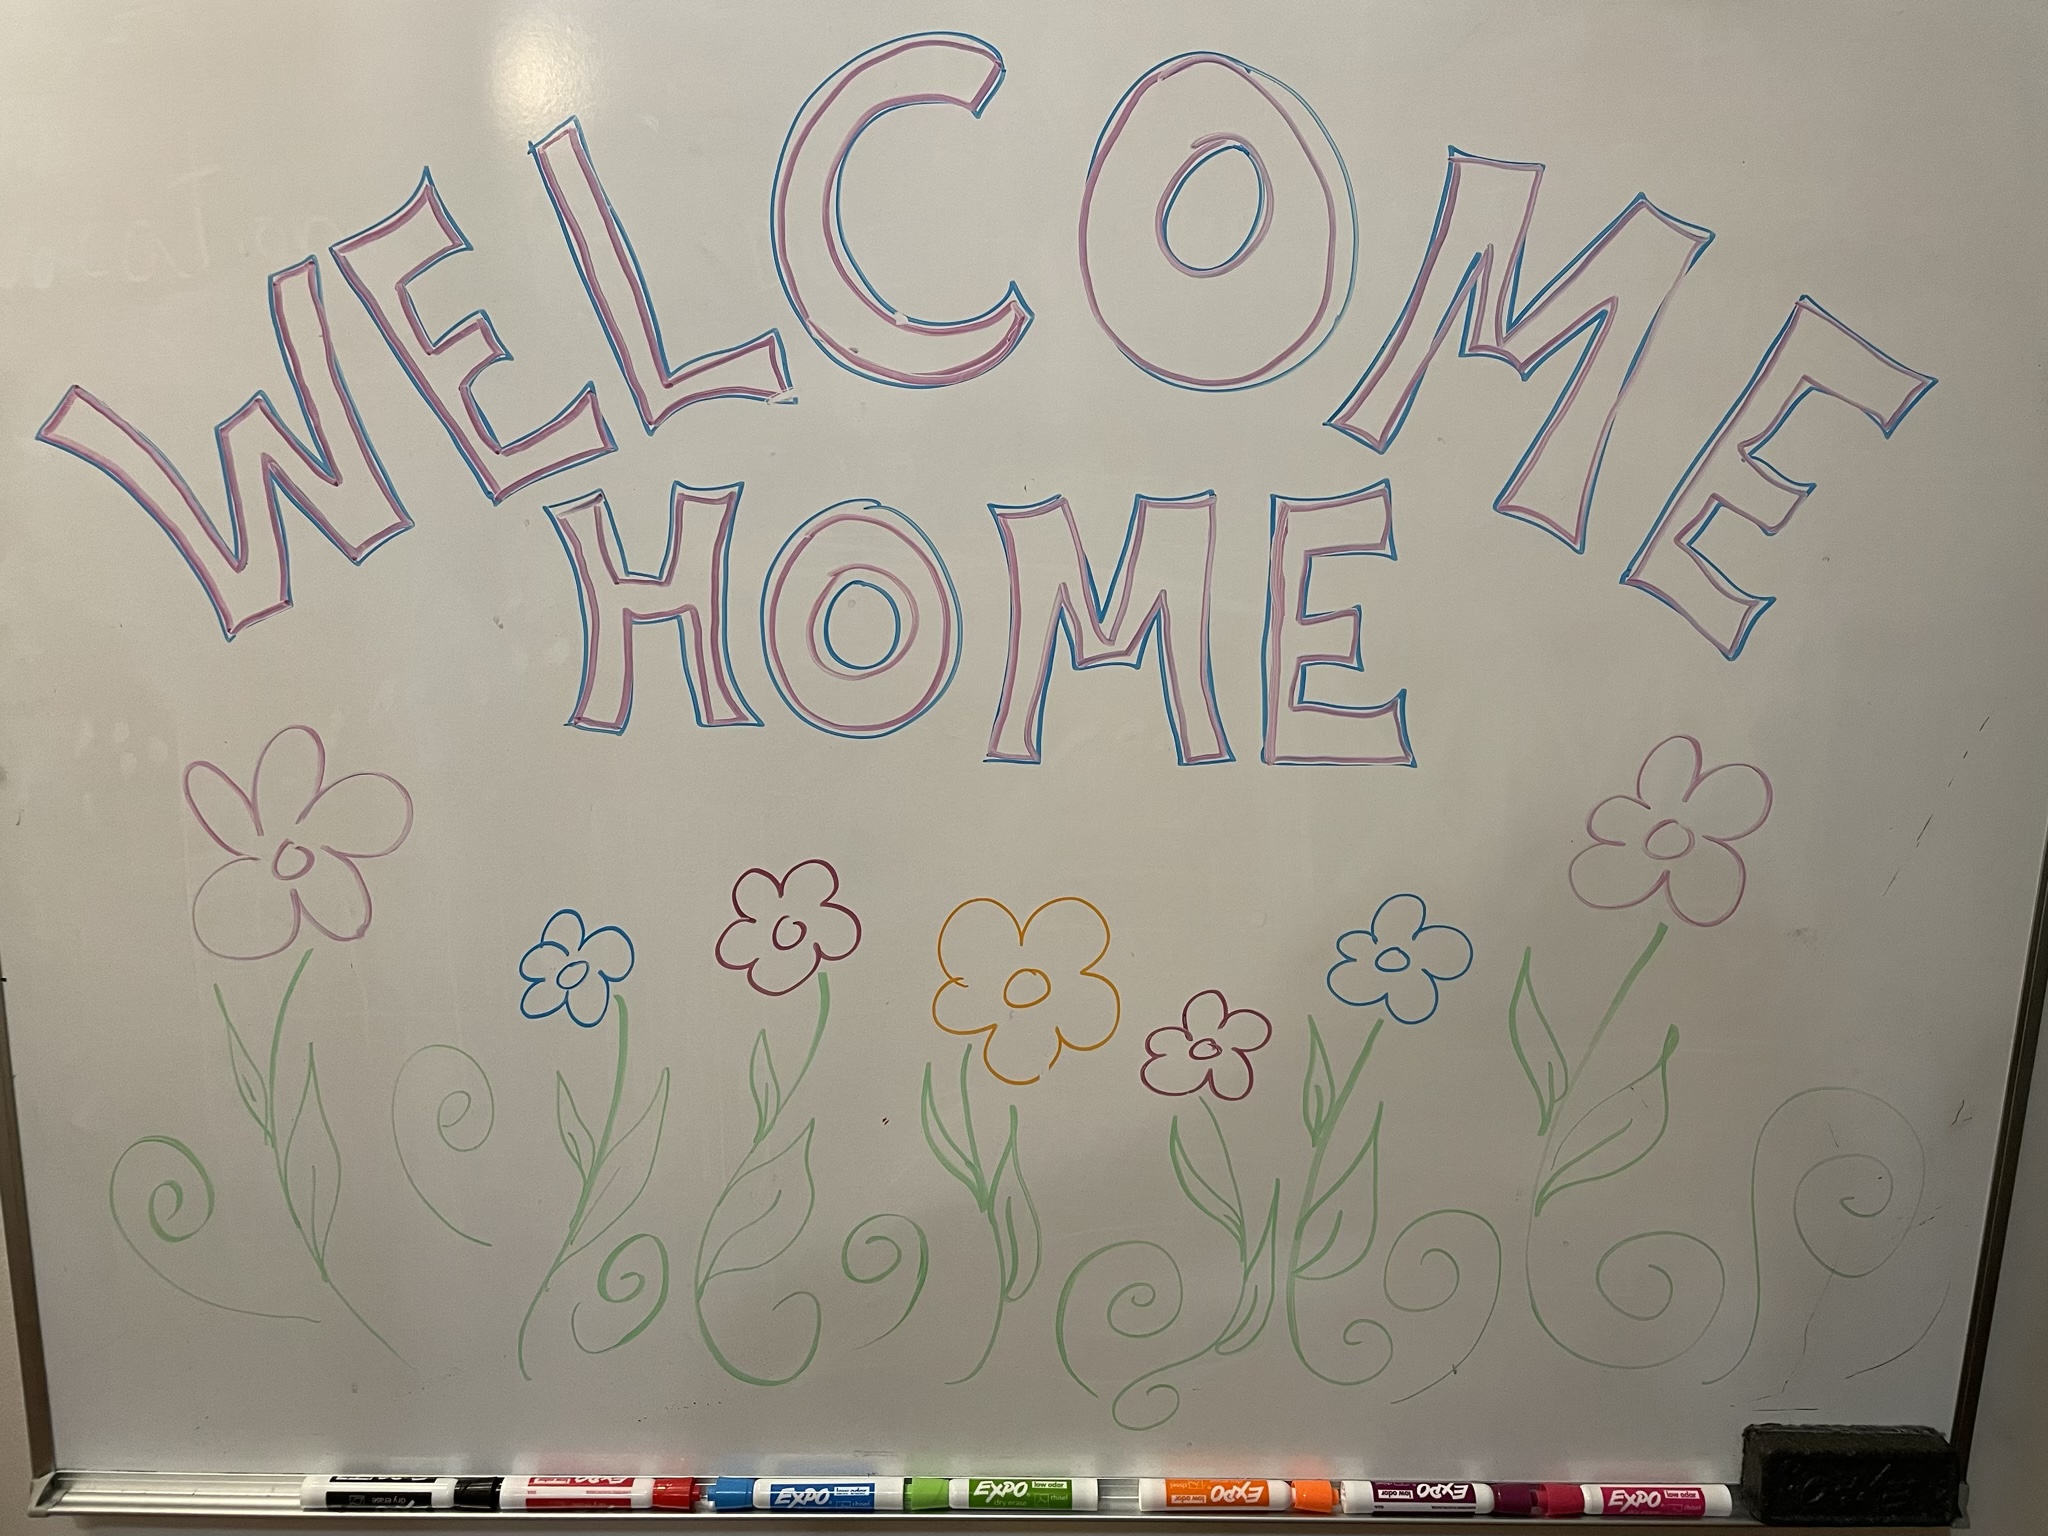 A photo of a whiteboard with the words "welcome home" written on it and drawings of spring flowers